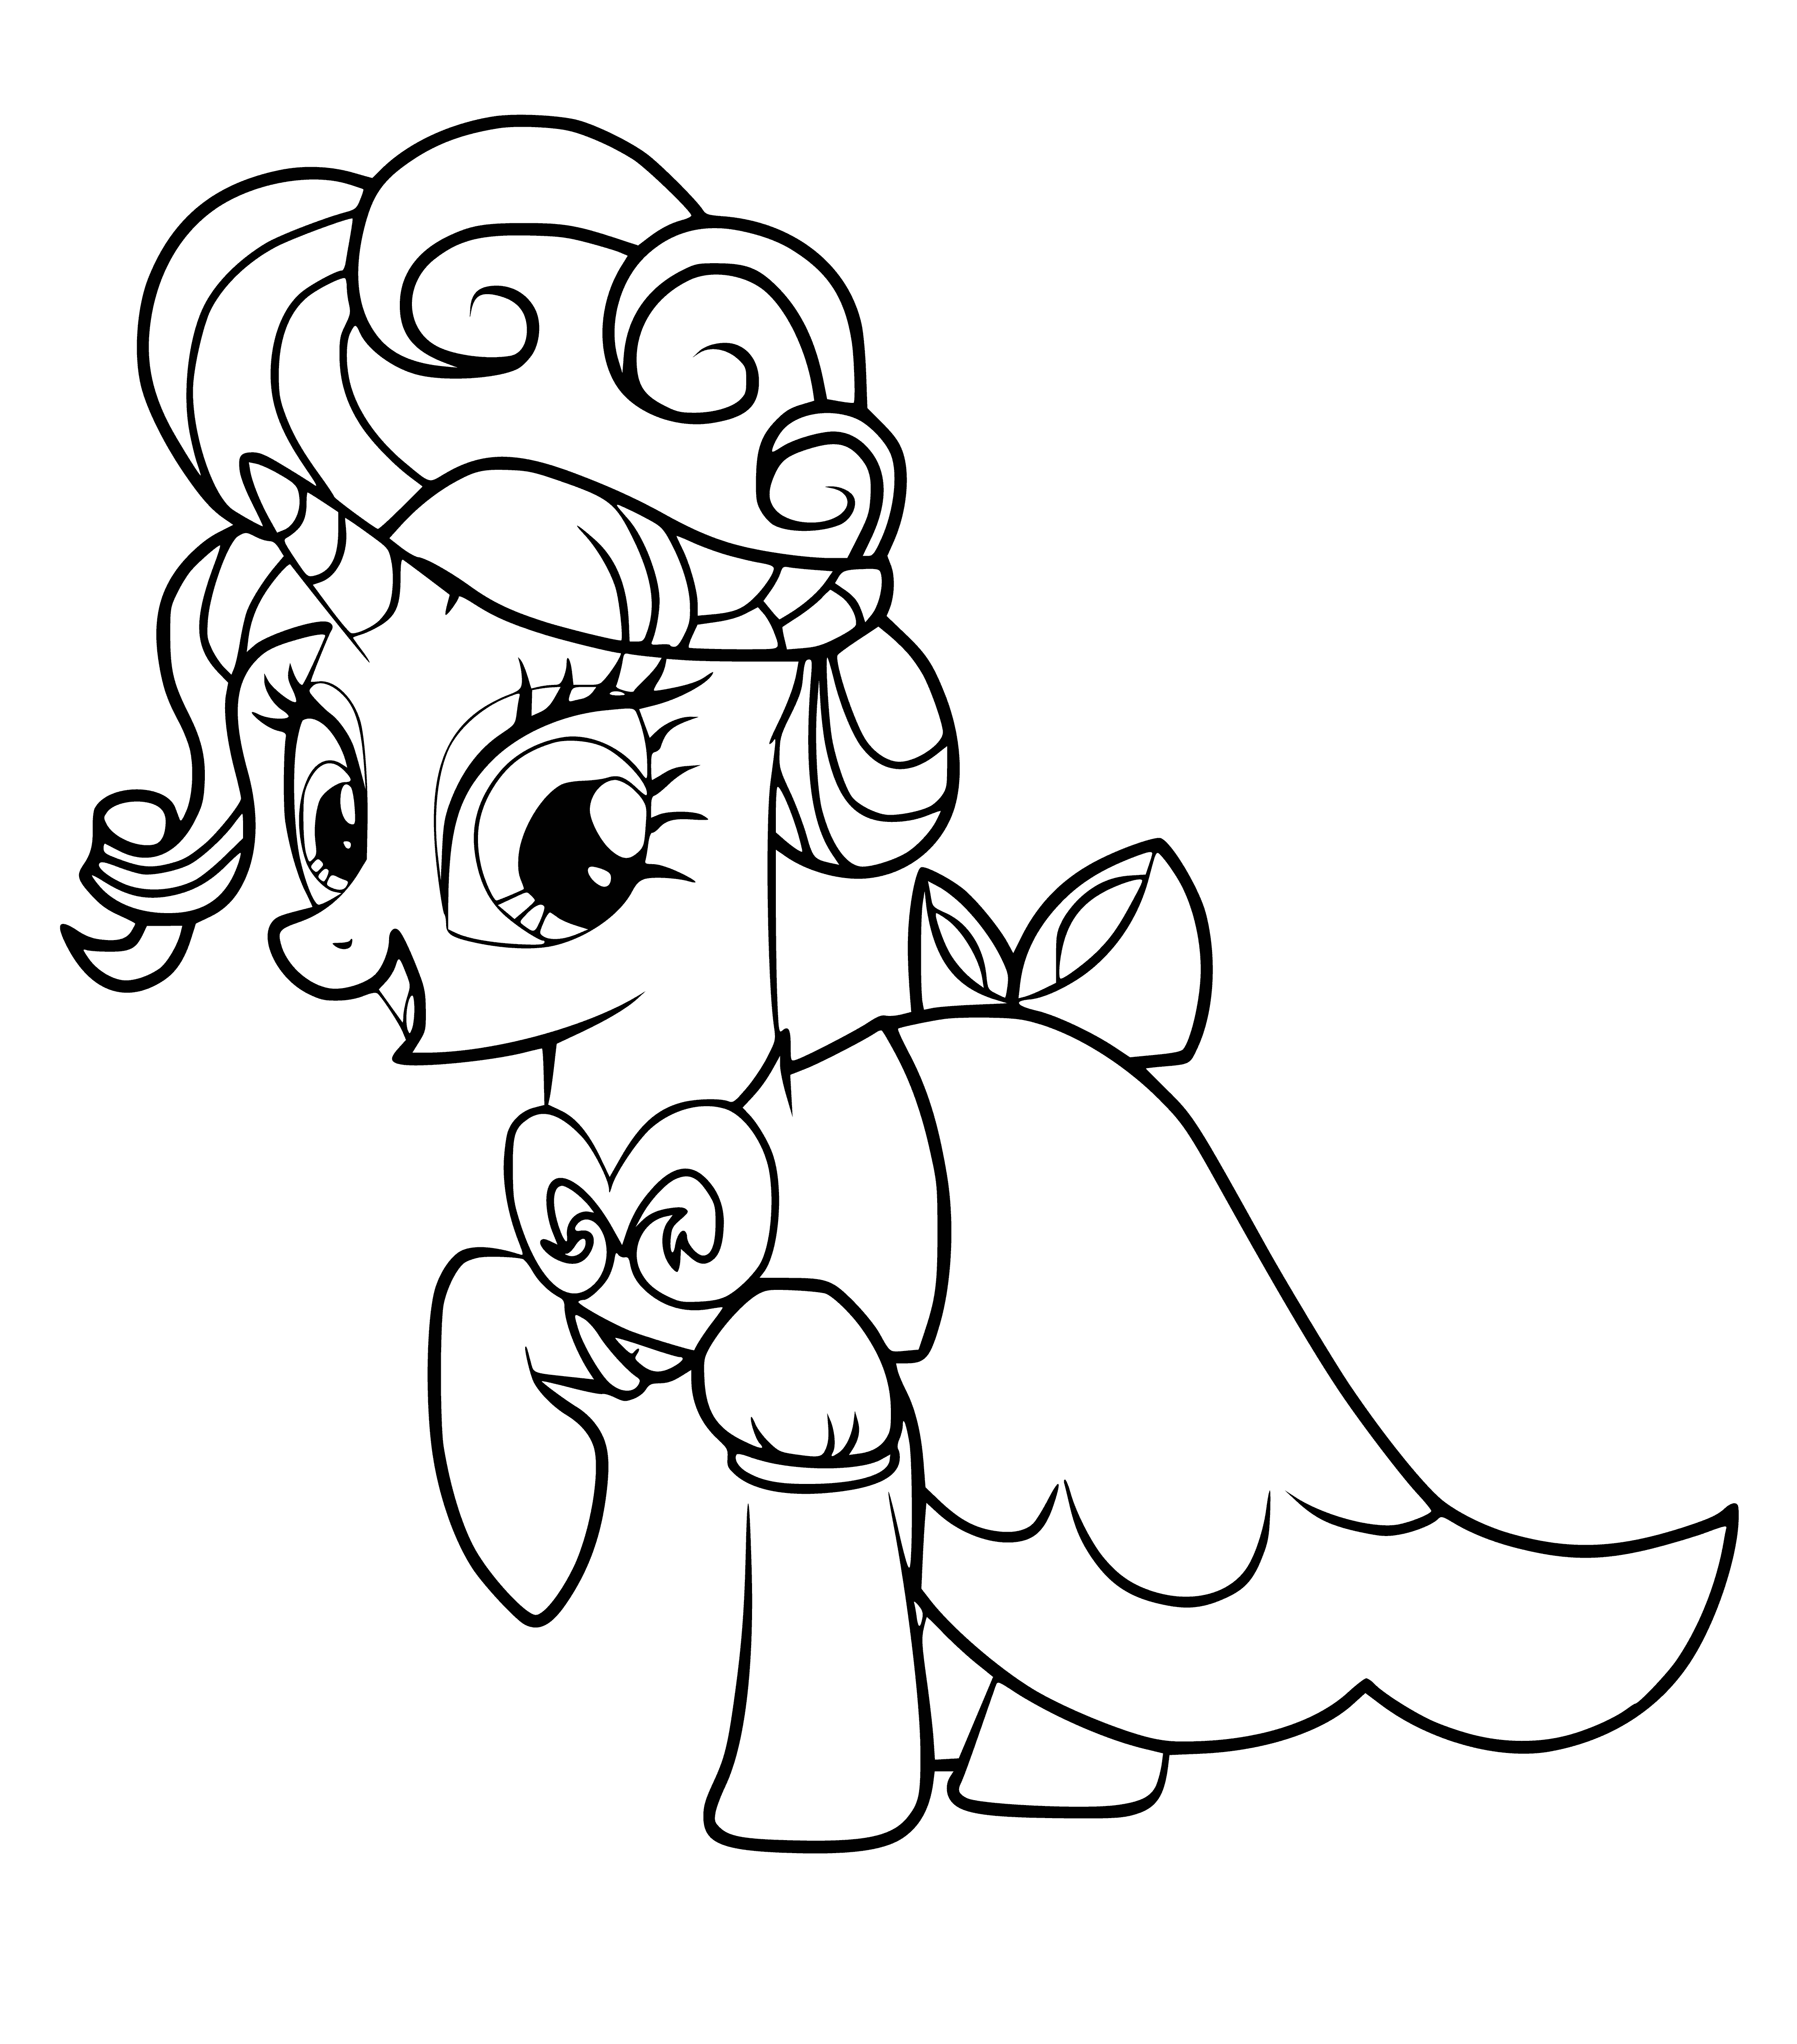 coloring page: This pony has a pink & white saddle, magenta coat, purple & white mane & a blue gem on its forehead. #PonyLife